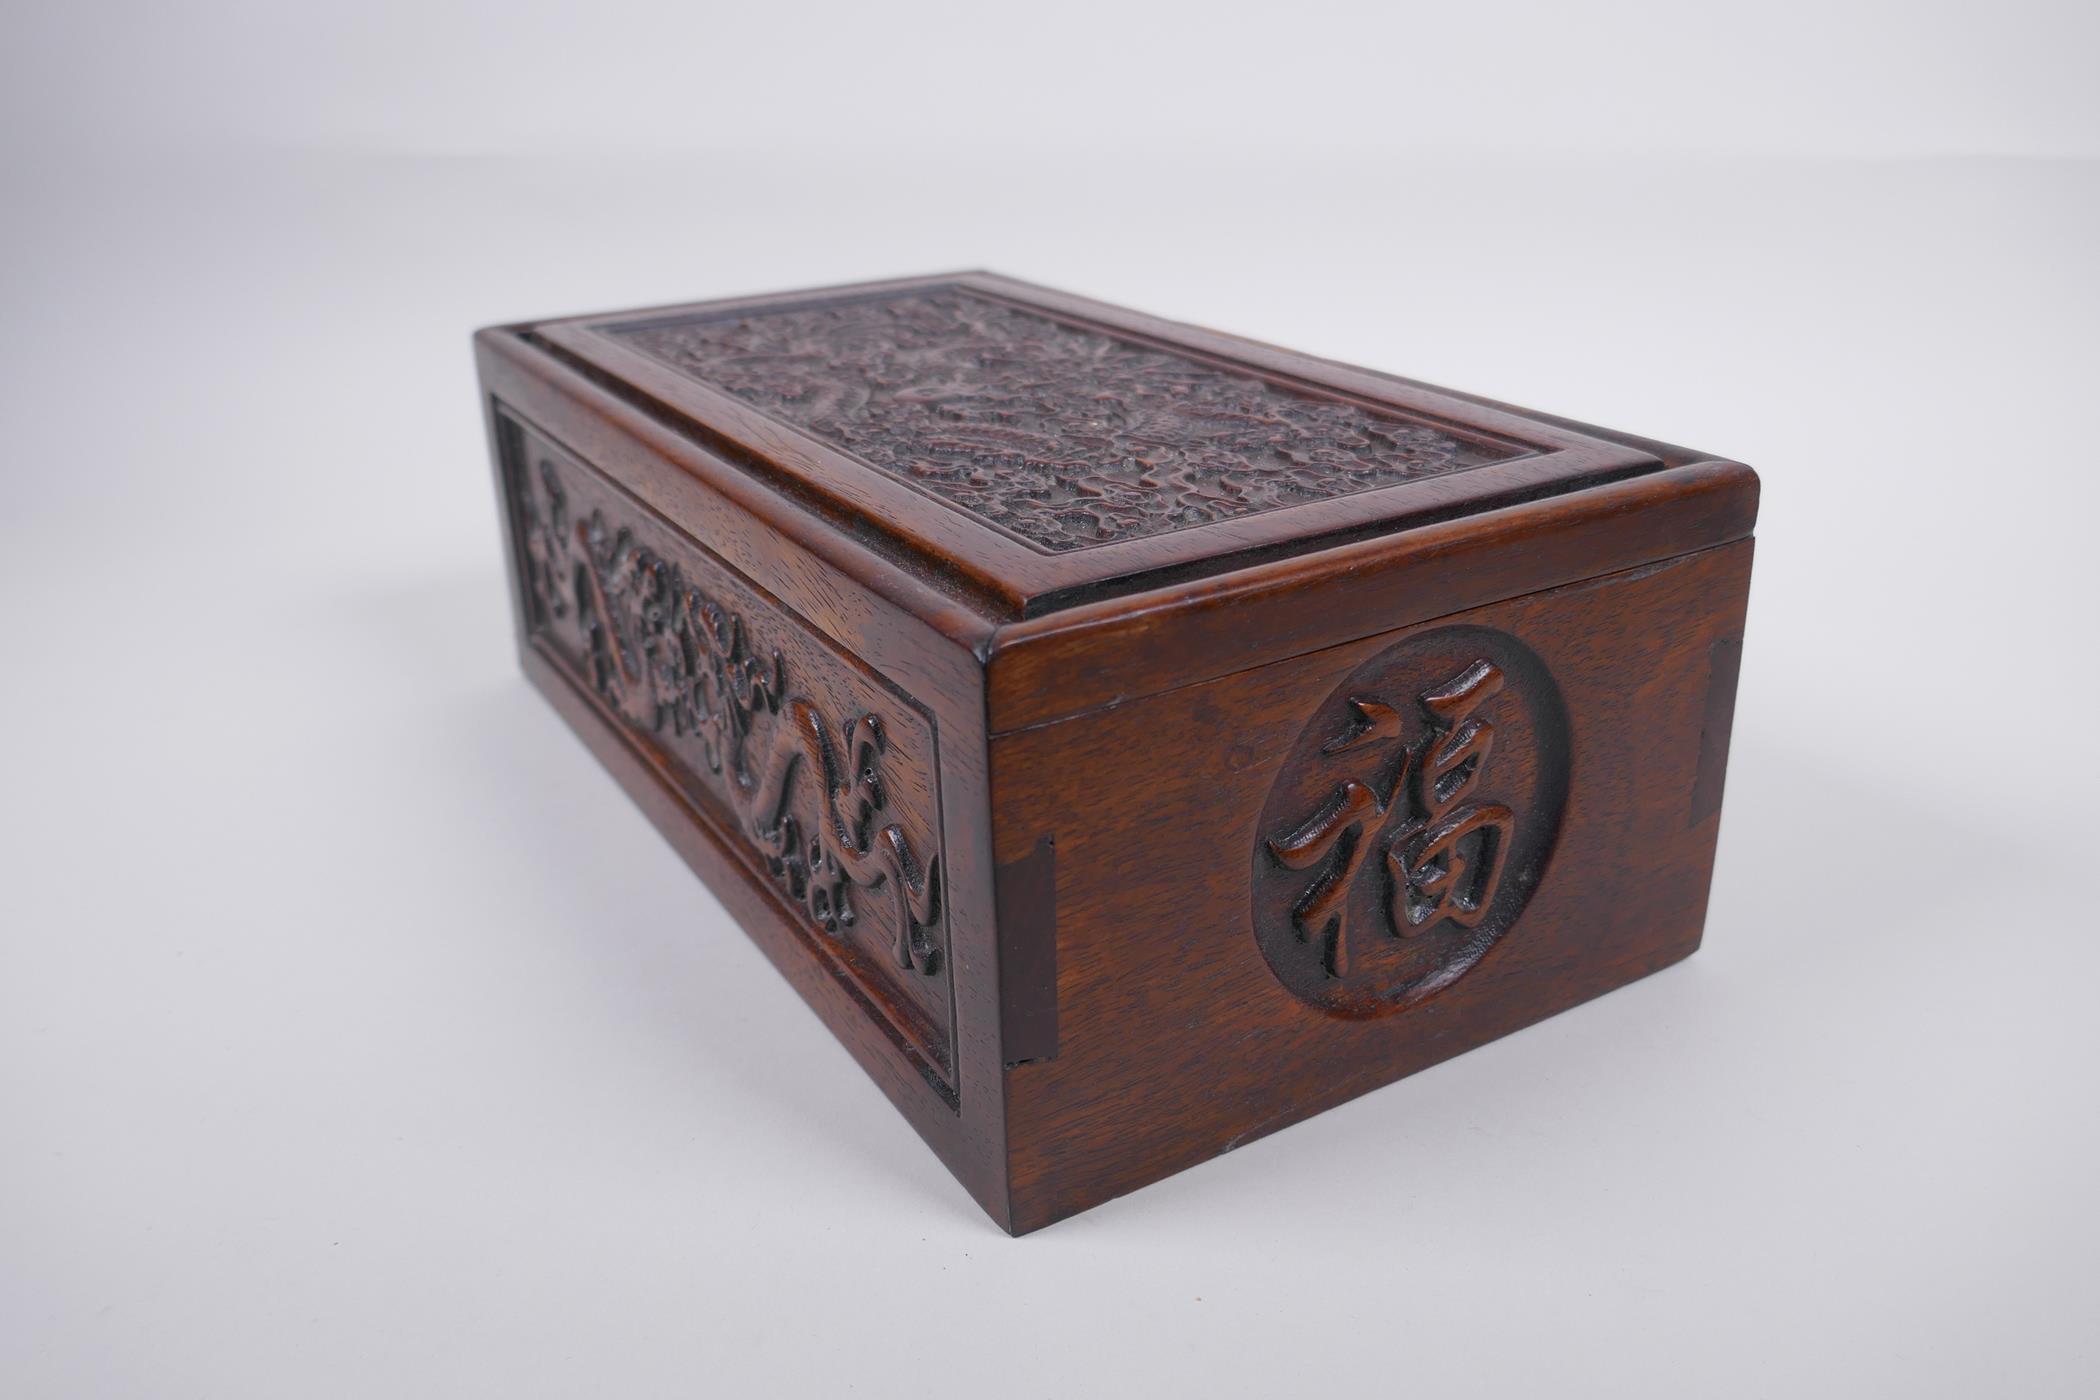 A Chinese carved hardwood box with dragon and character decoration, 28 x 16cm - Image 4 of 4